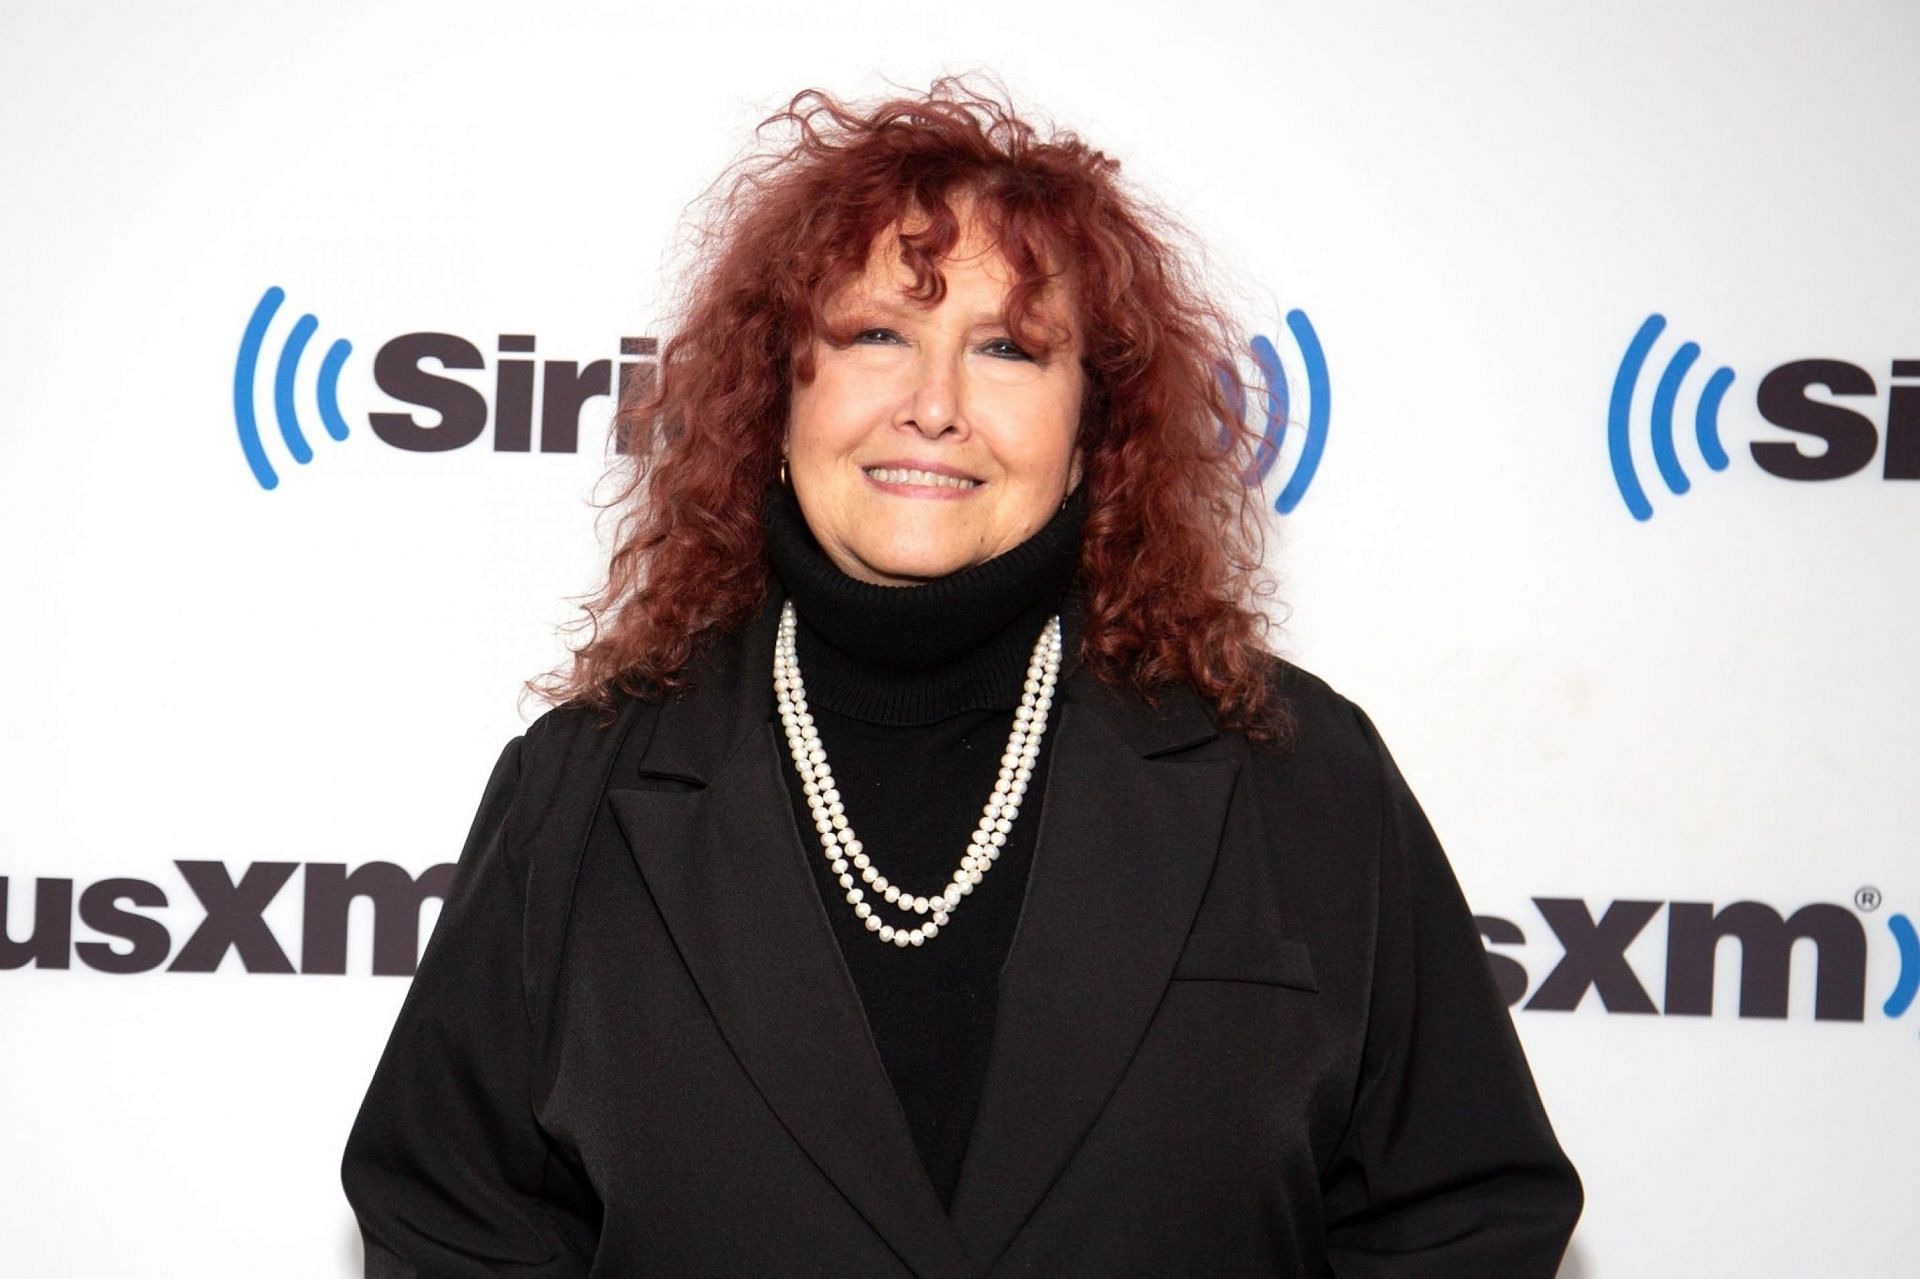 Melissa Manchester, who plays one of the main characters in Funny Girl, at the SiriusXM Studios  in New York City on May 03, 2023 (Image via Getty Images)